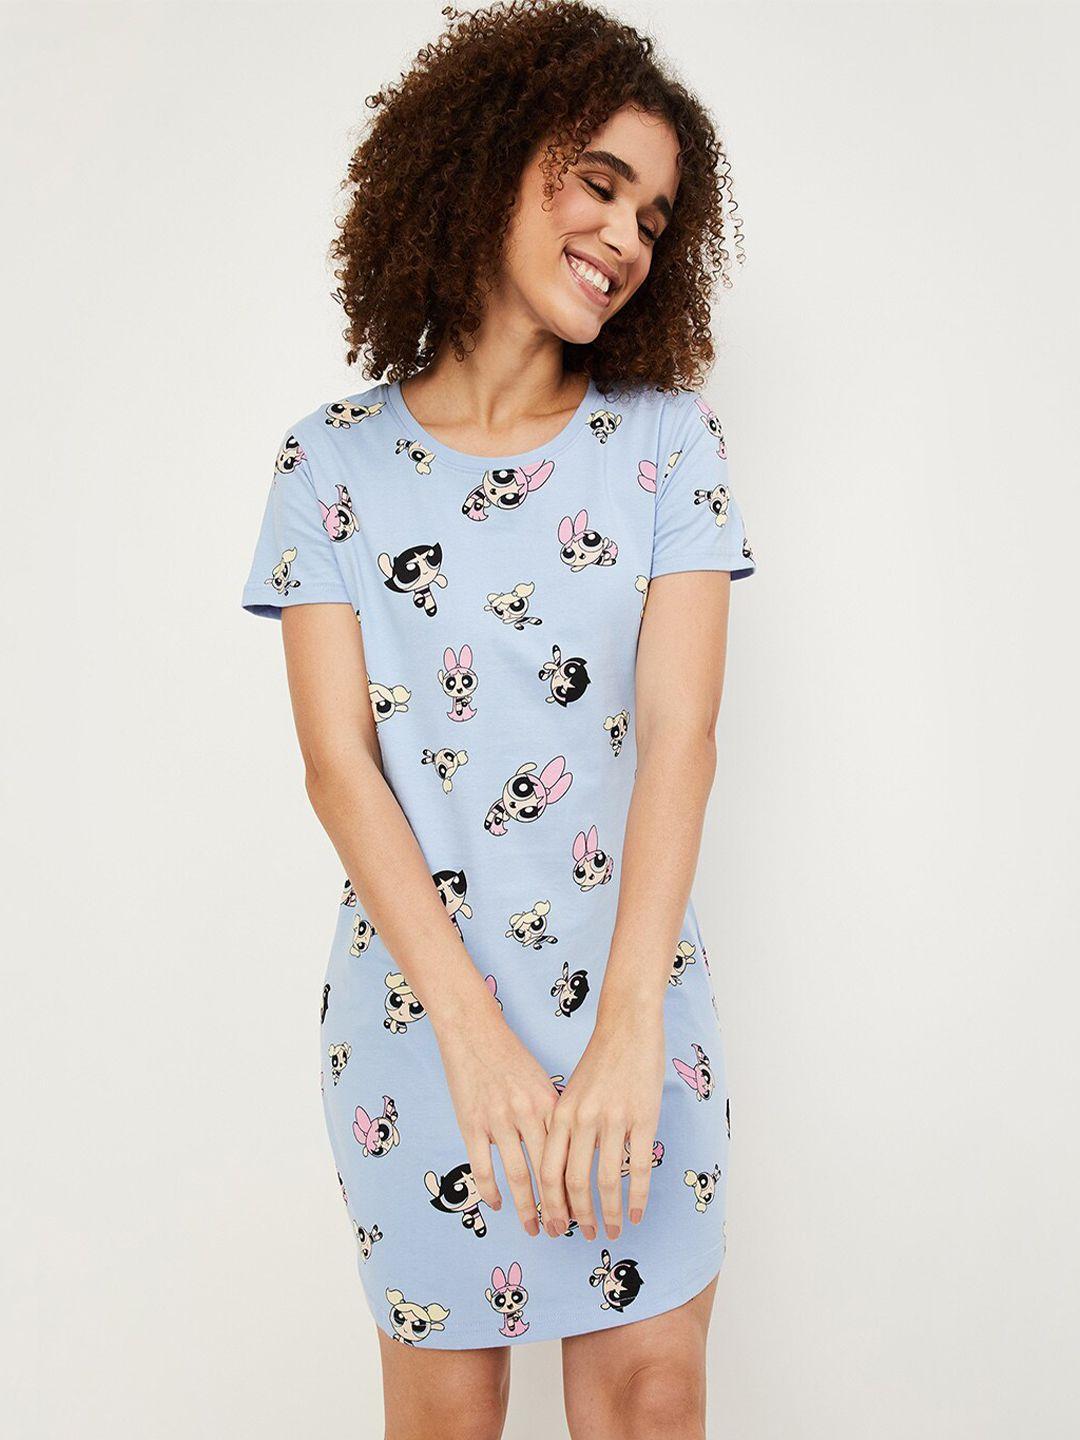 max-cartoon-characters-printed-round-neck-pure-cotton-t-shirt-nightdress